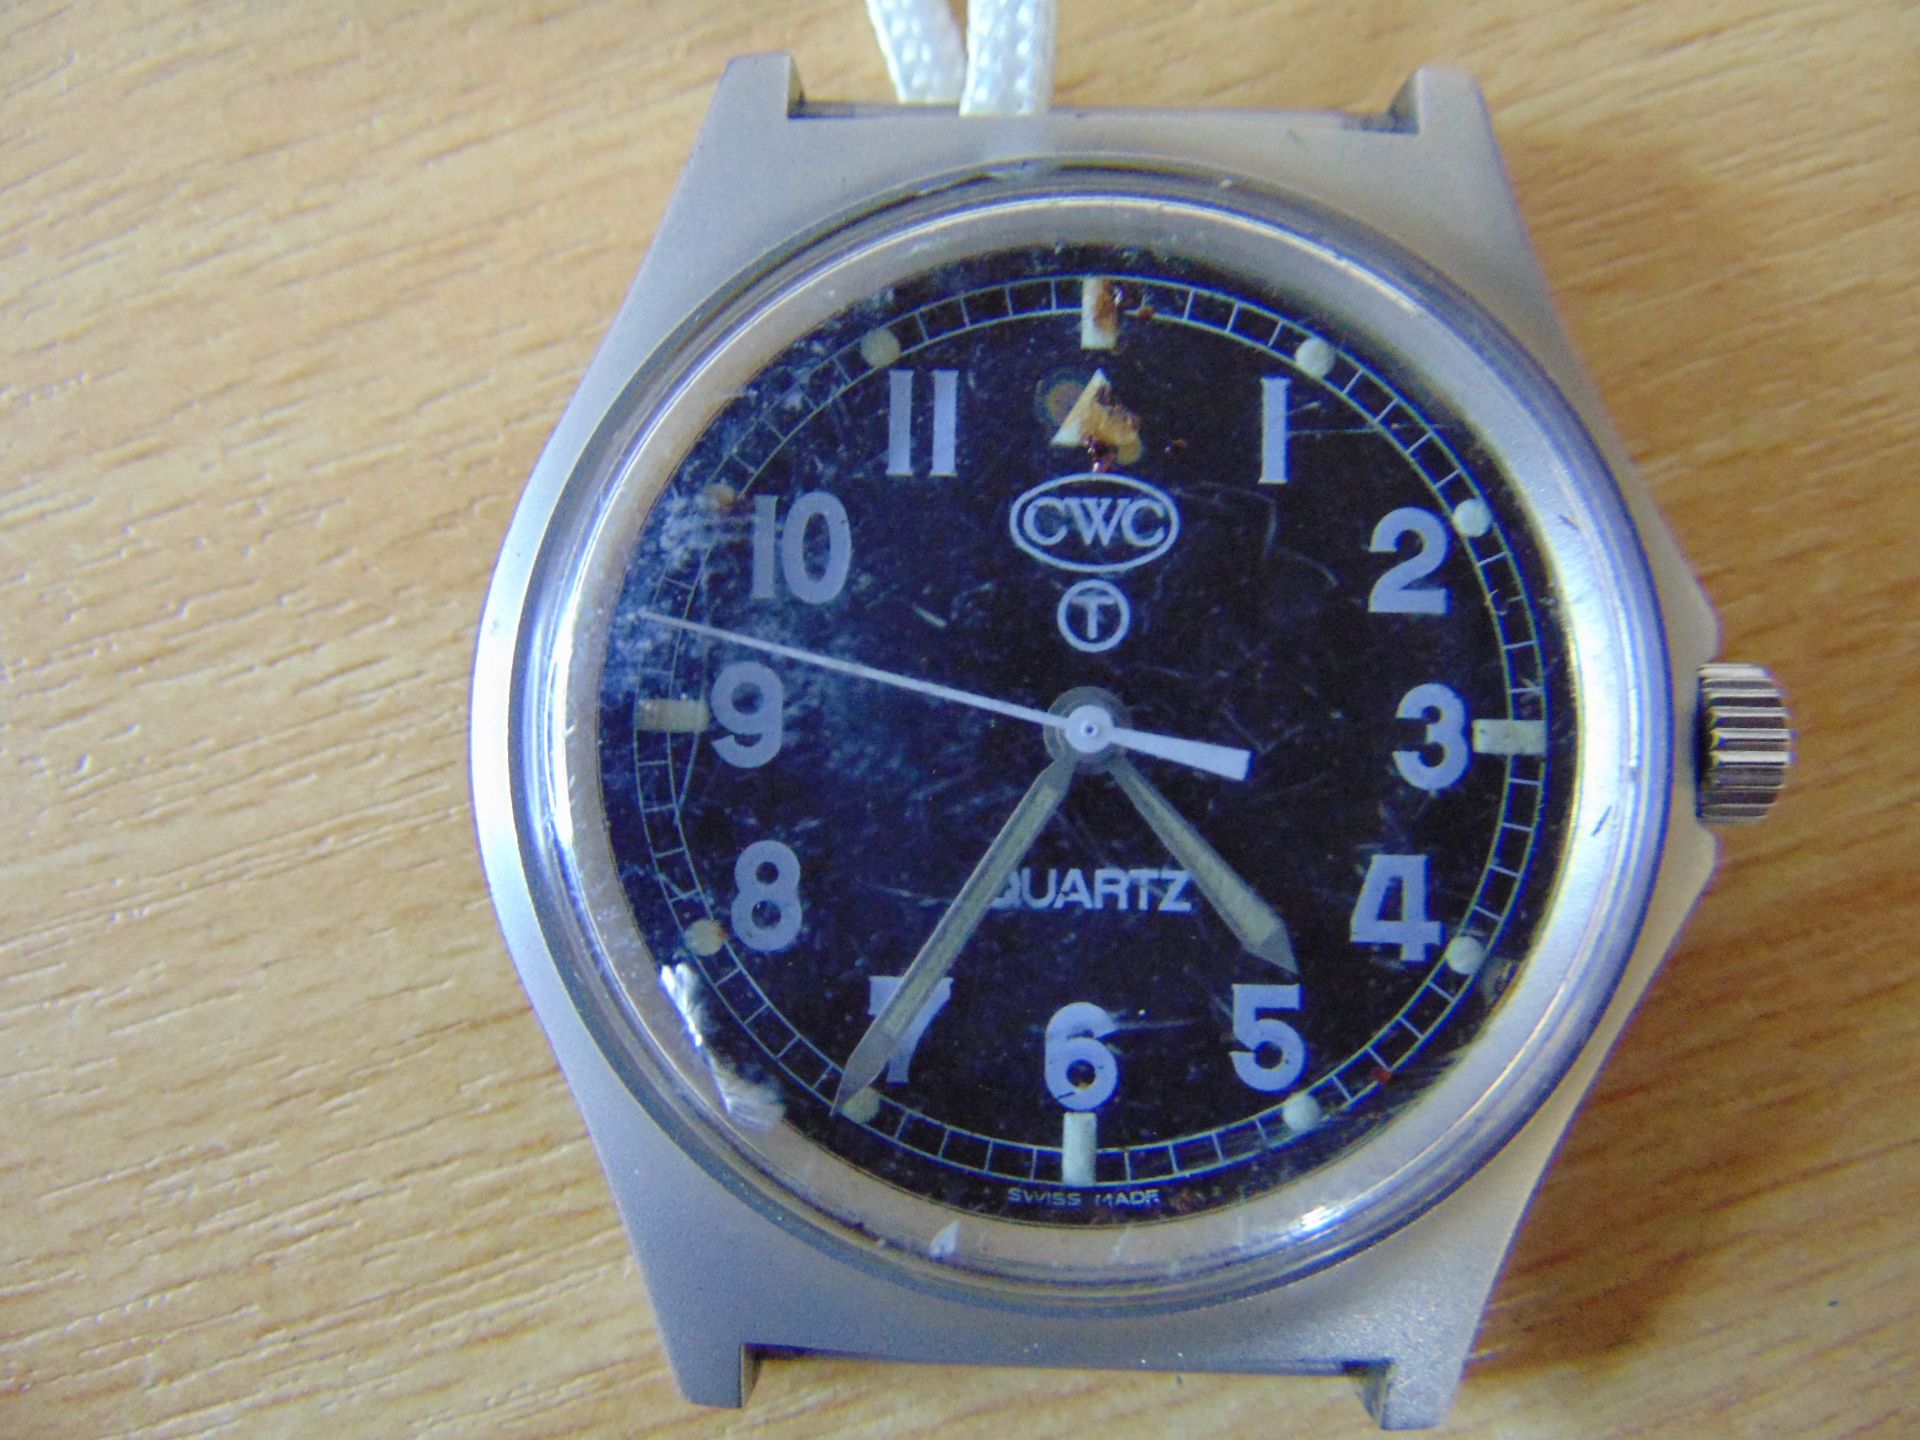 CWC 0552 ROYAL MARINES/ NAVY ISSUE SERVICE WATCH NATO MARKS DATE 1990 GULF WAR I - Image 2 of 6